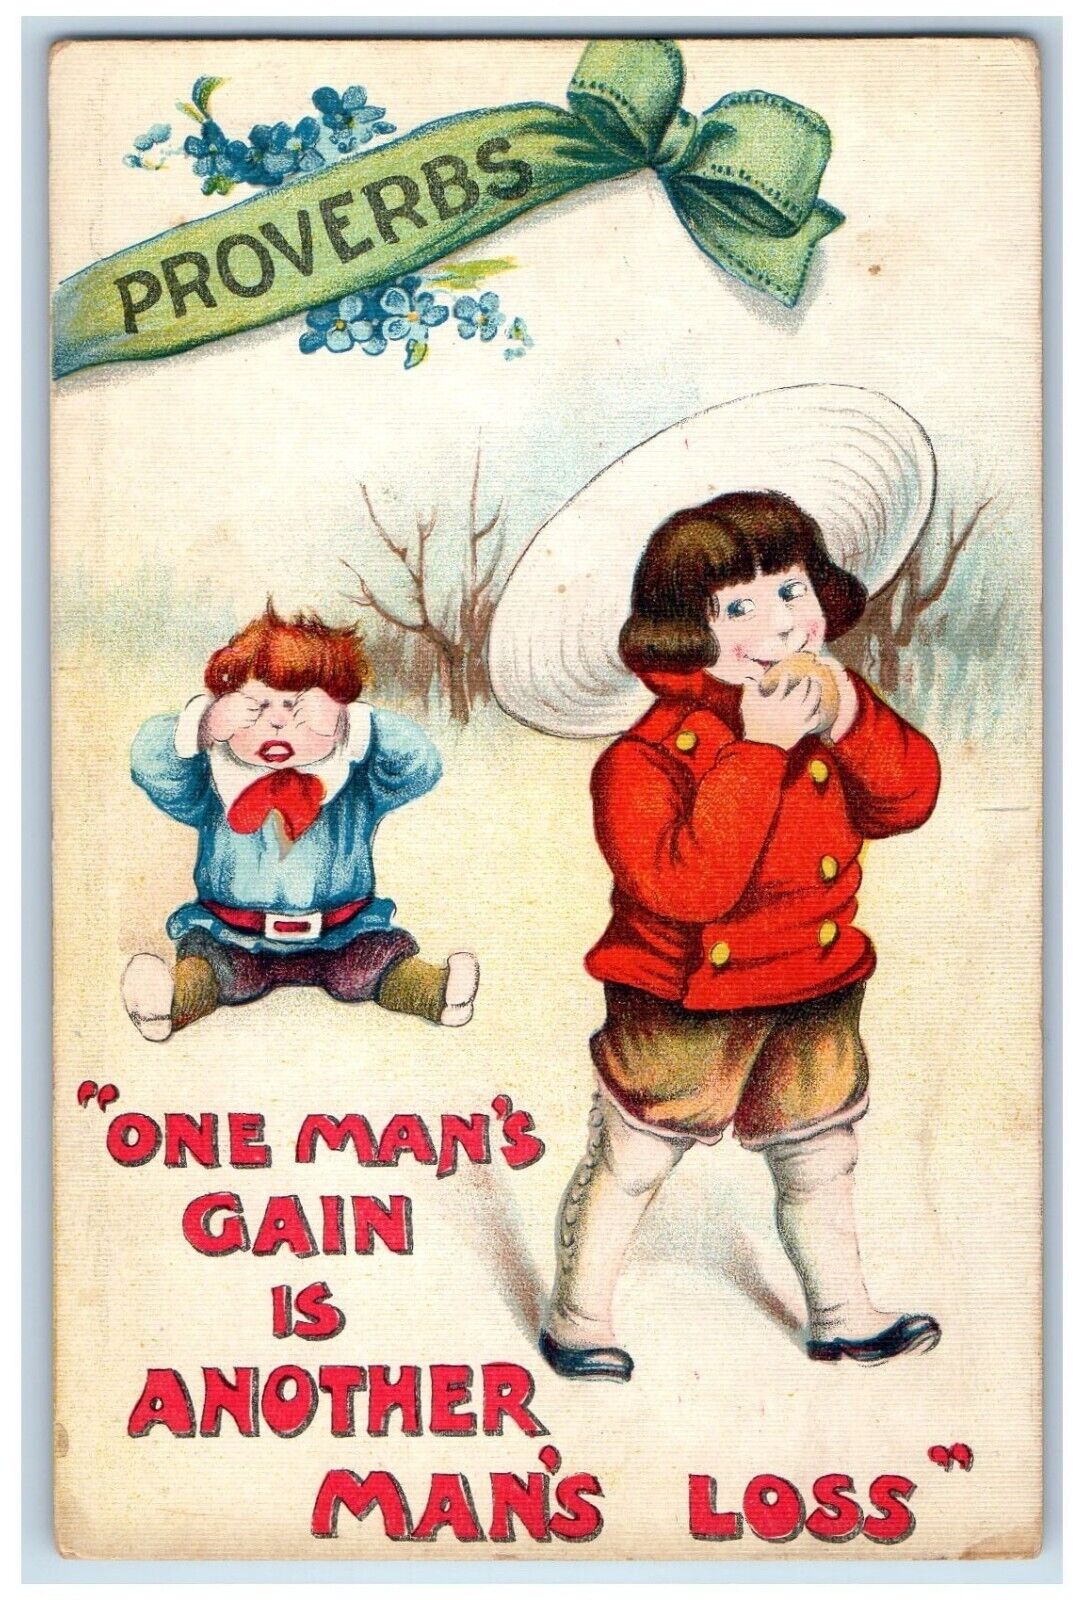 Proverbs Postcard Children One Man's Is Another Man's Loss Flowers c1910s Posted